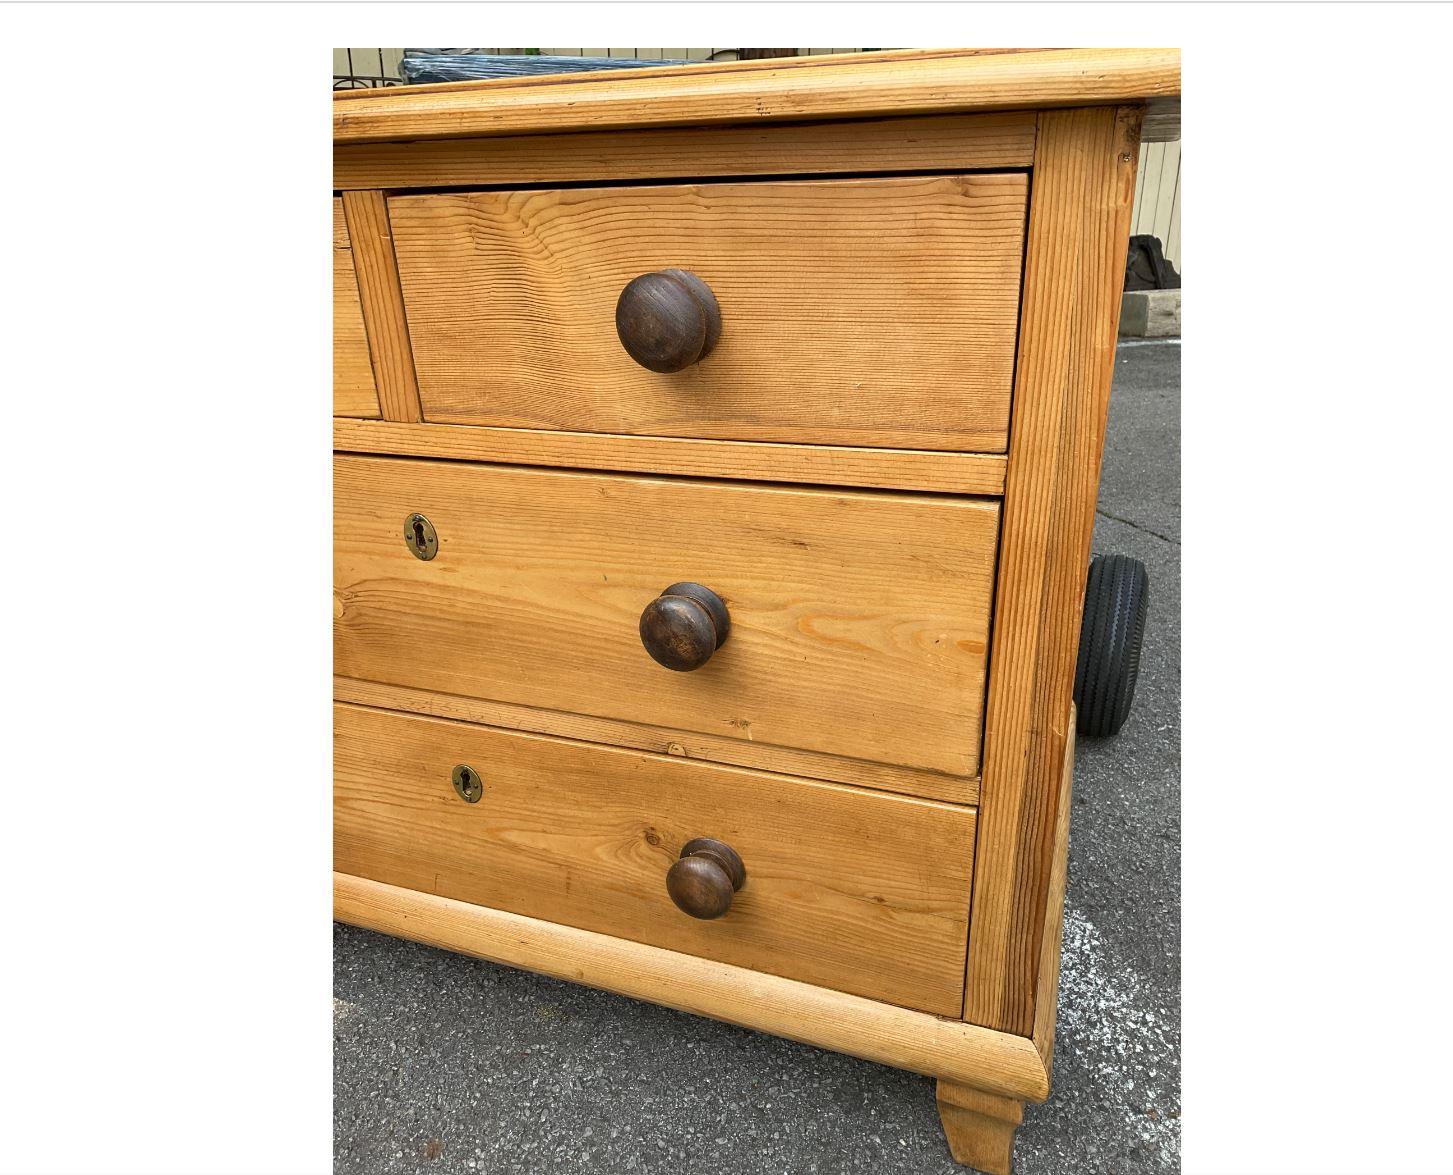 This 19th Century English pine chest has a beautiful warm tone patina with dark stained knobs. All of the drawers slide perfectly, making it easy for you to get items in and out of it. The colors, style and design of this piece all combine to make